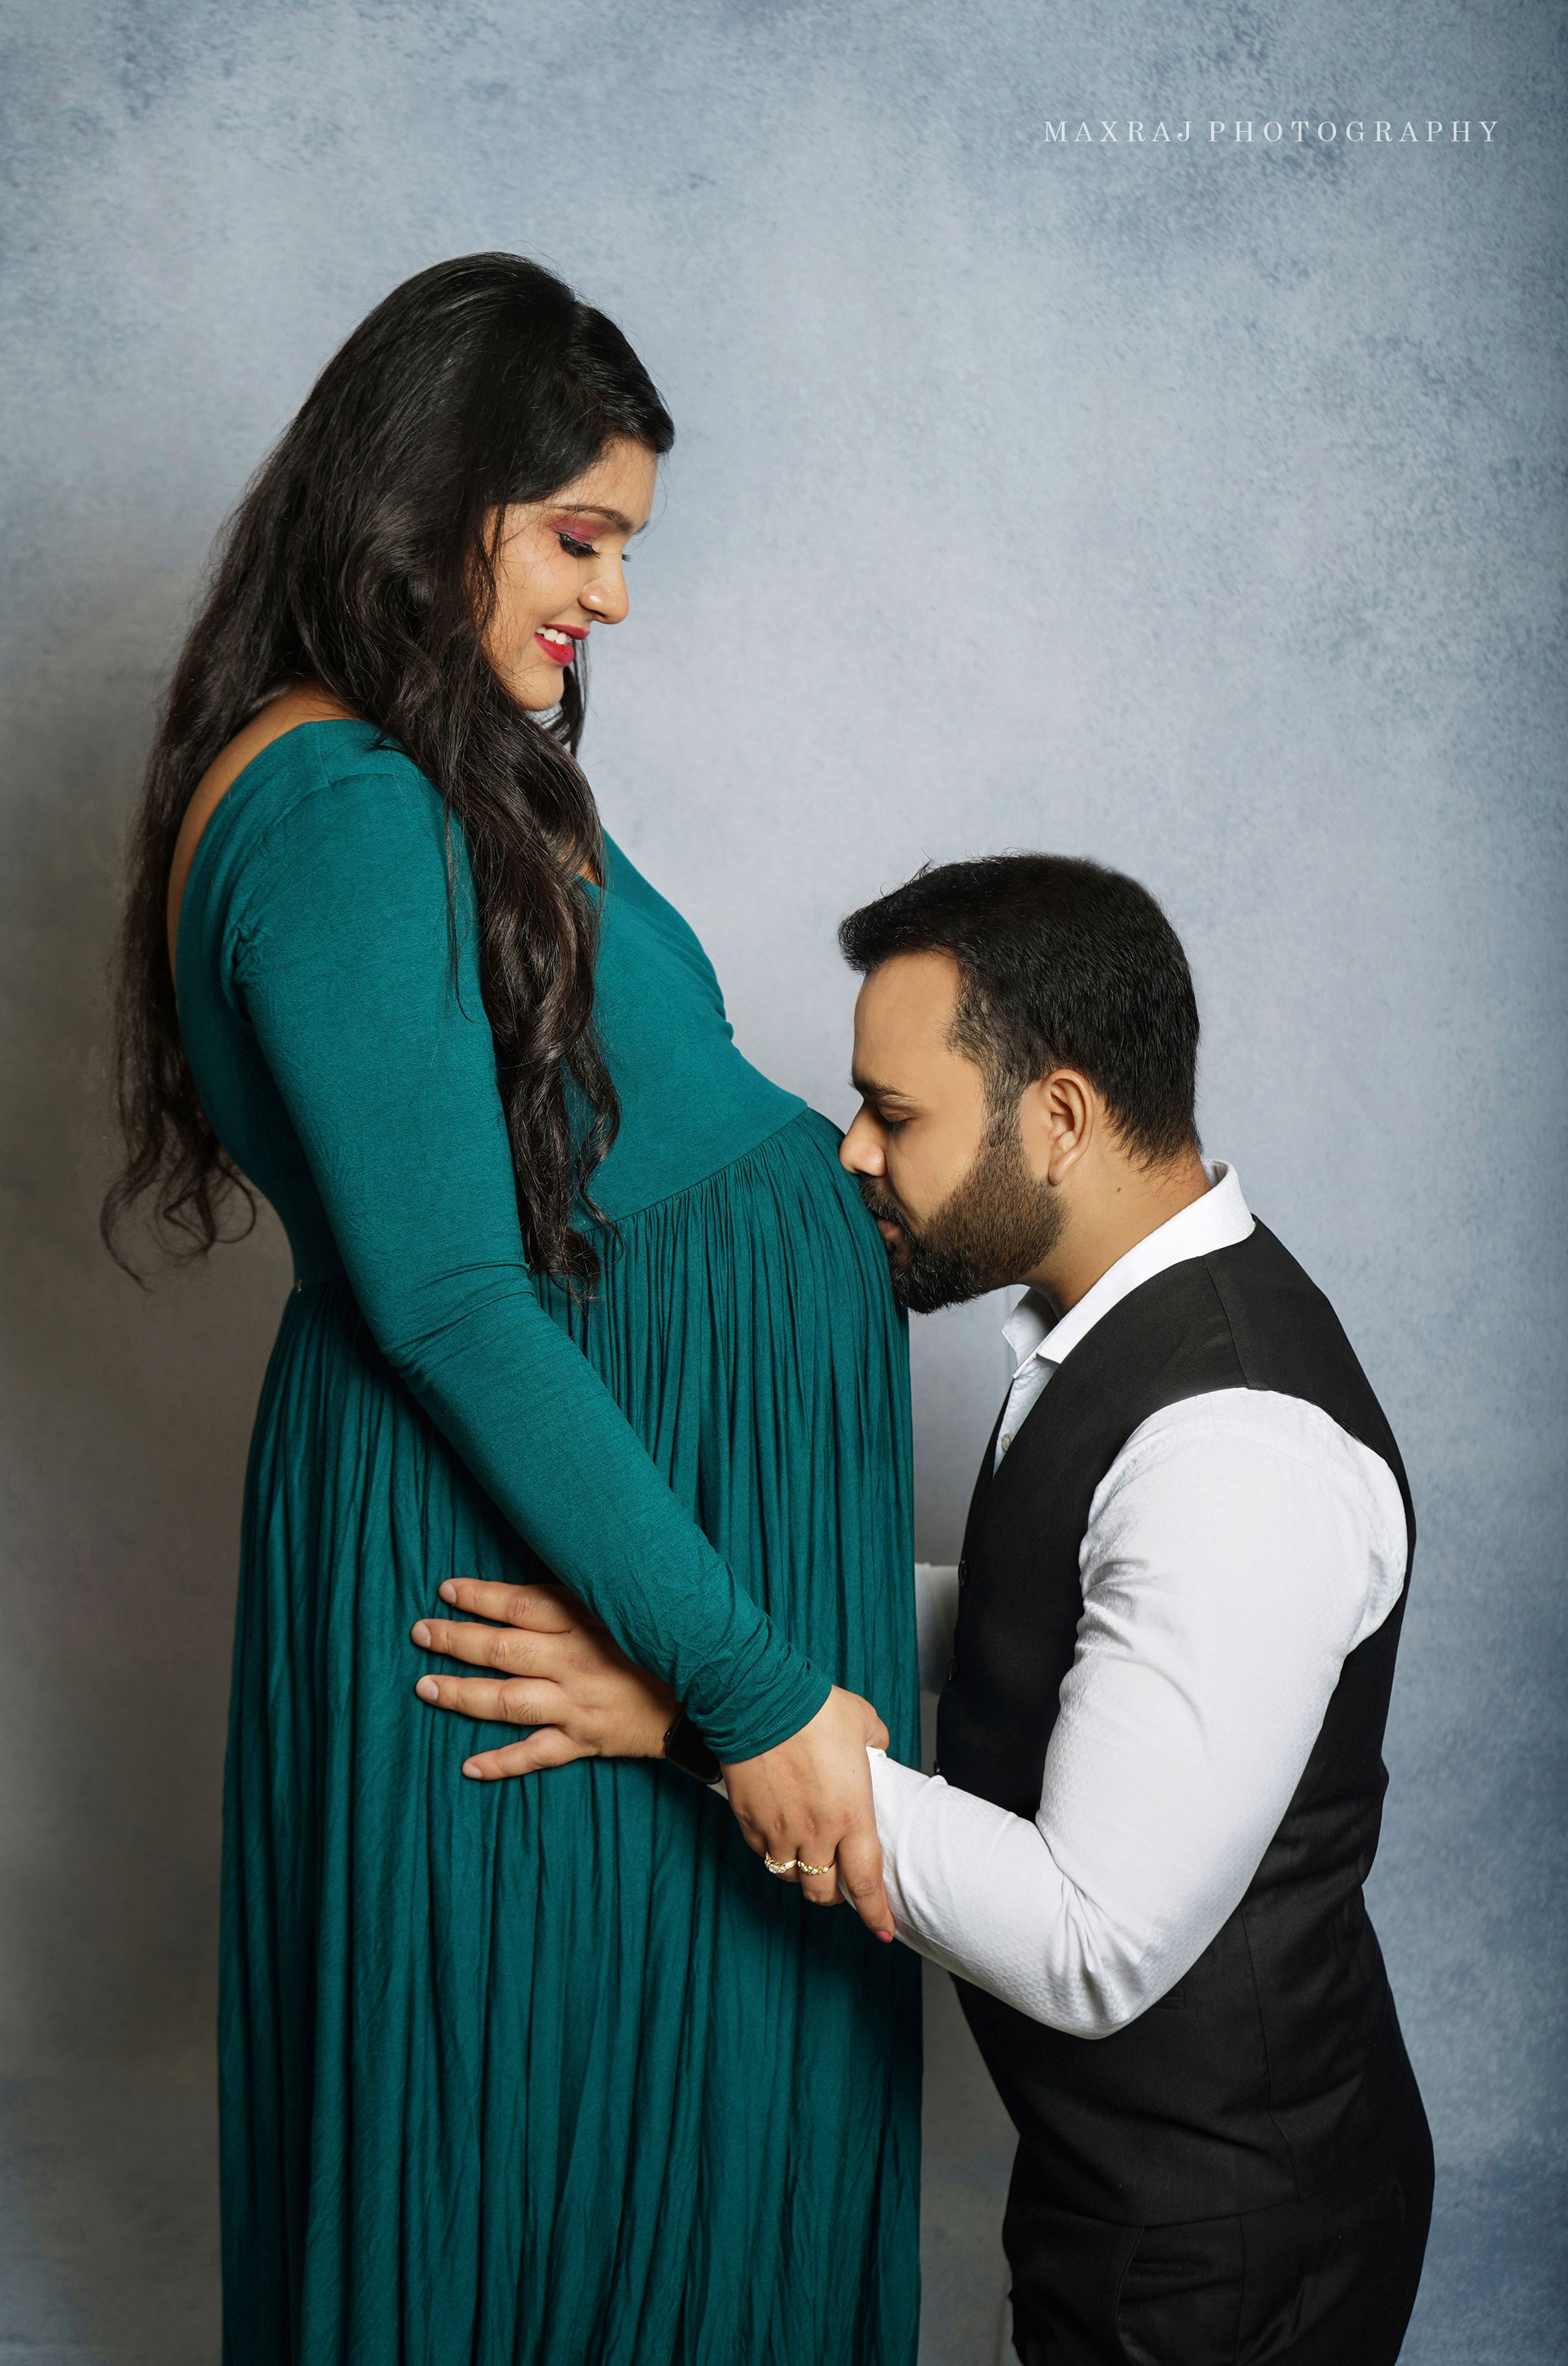 Complete Guide on Posing for Maternity Photos [Top 15 Poses]